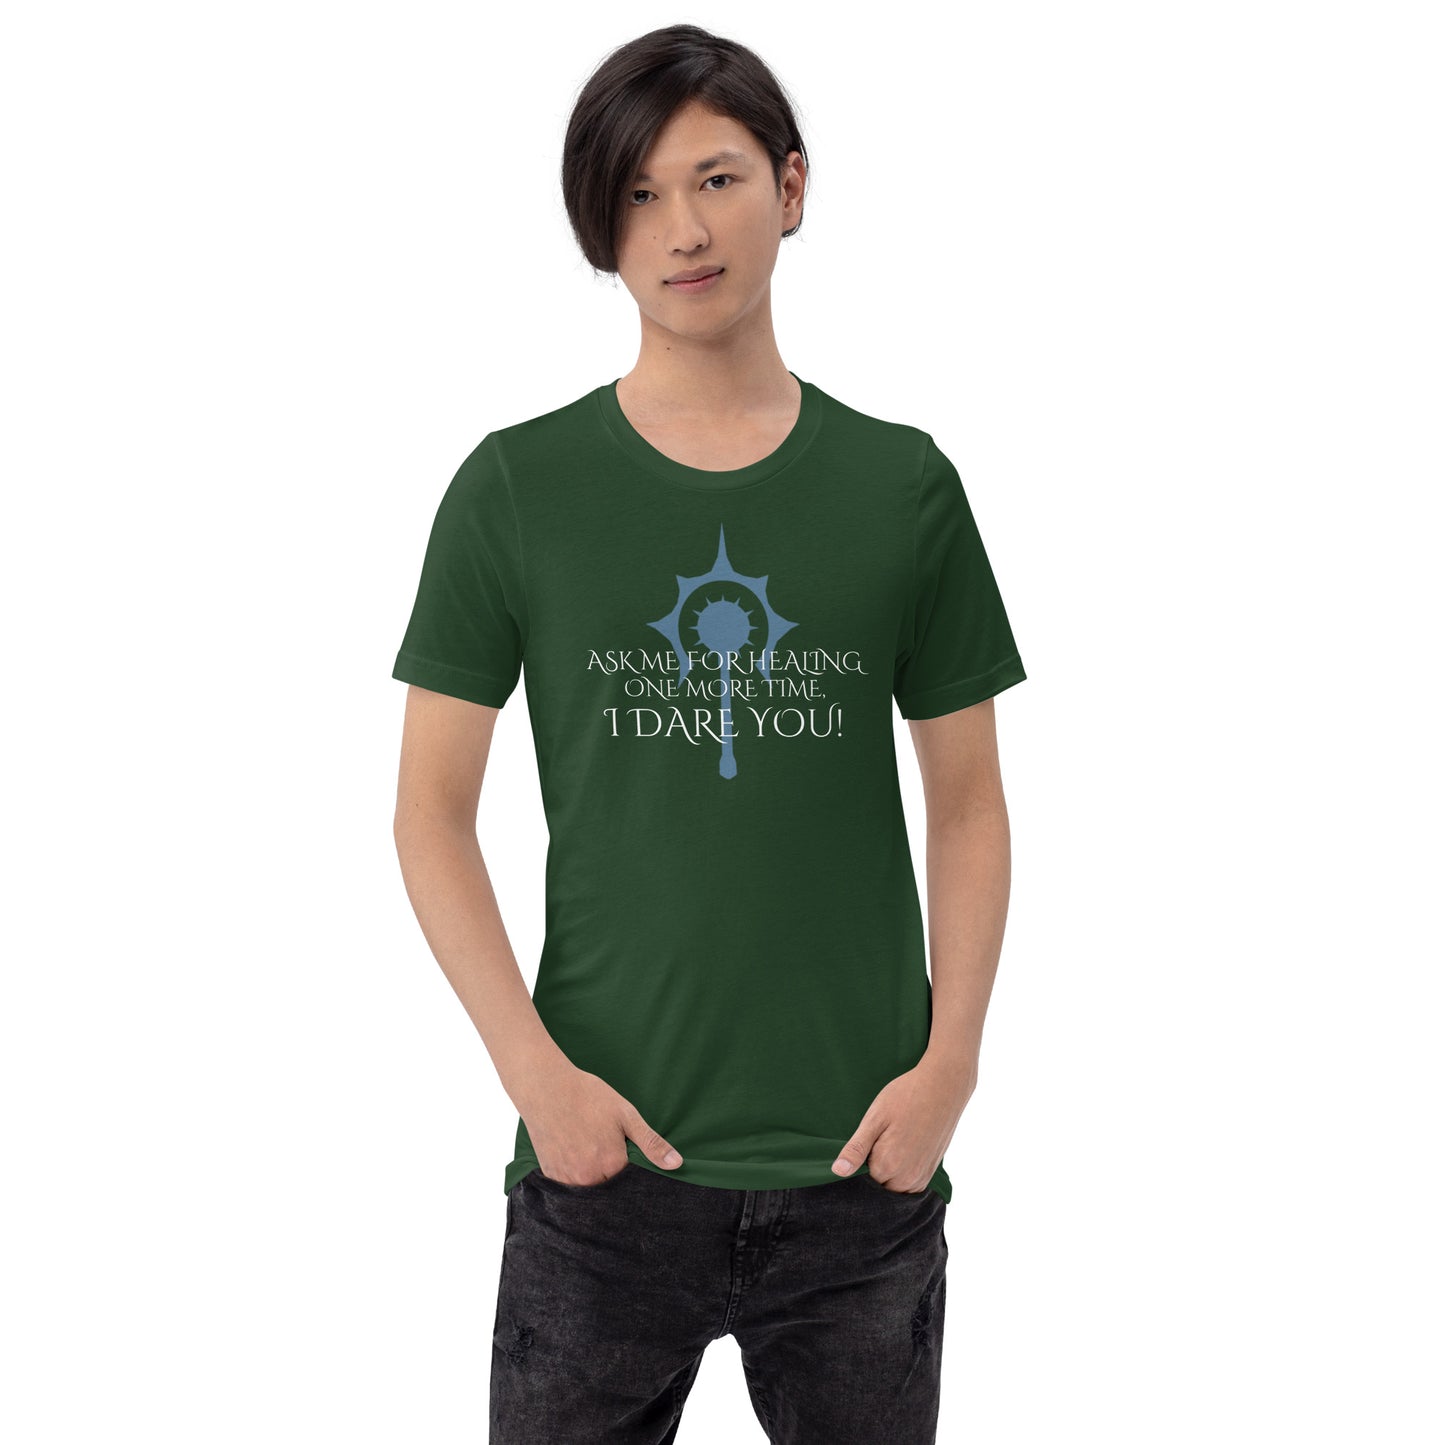 Ask me for healing one more time. Cleric D&D Shirt - Unisex t-shirt